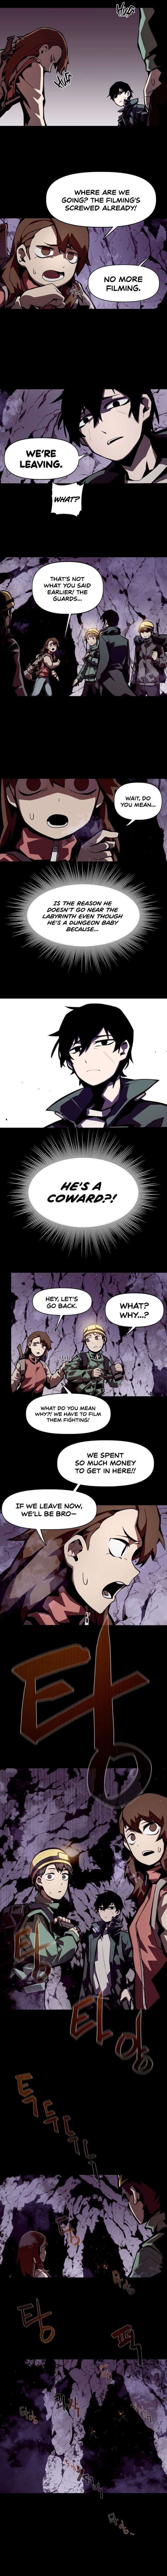 Dungeon Odyssey - Chapter 1 Page 9